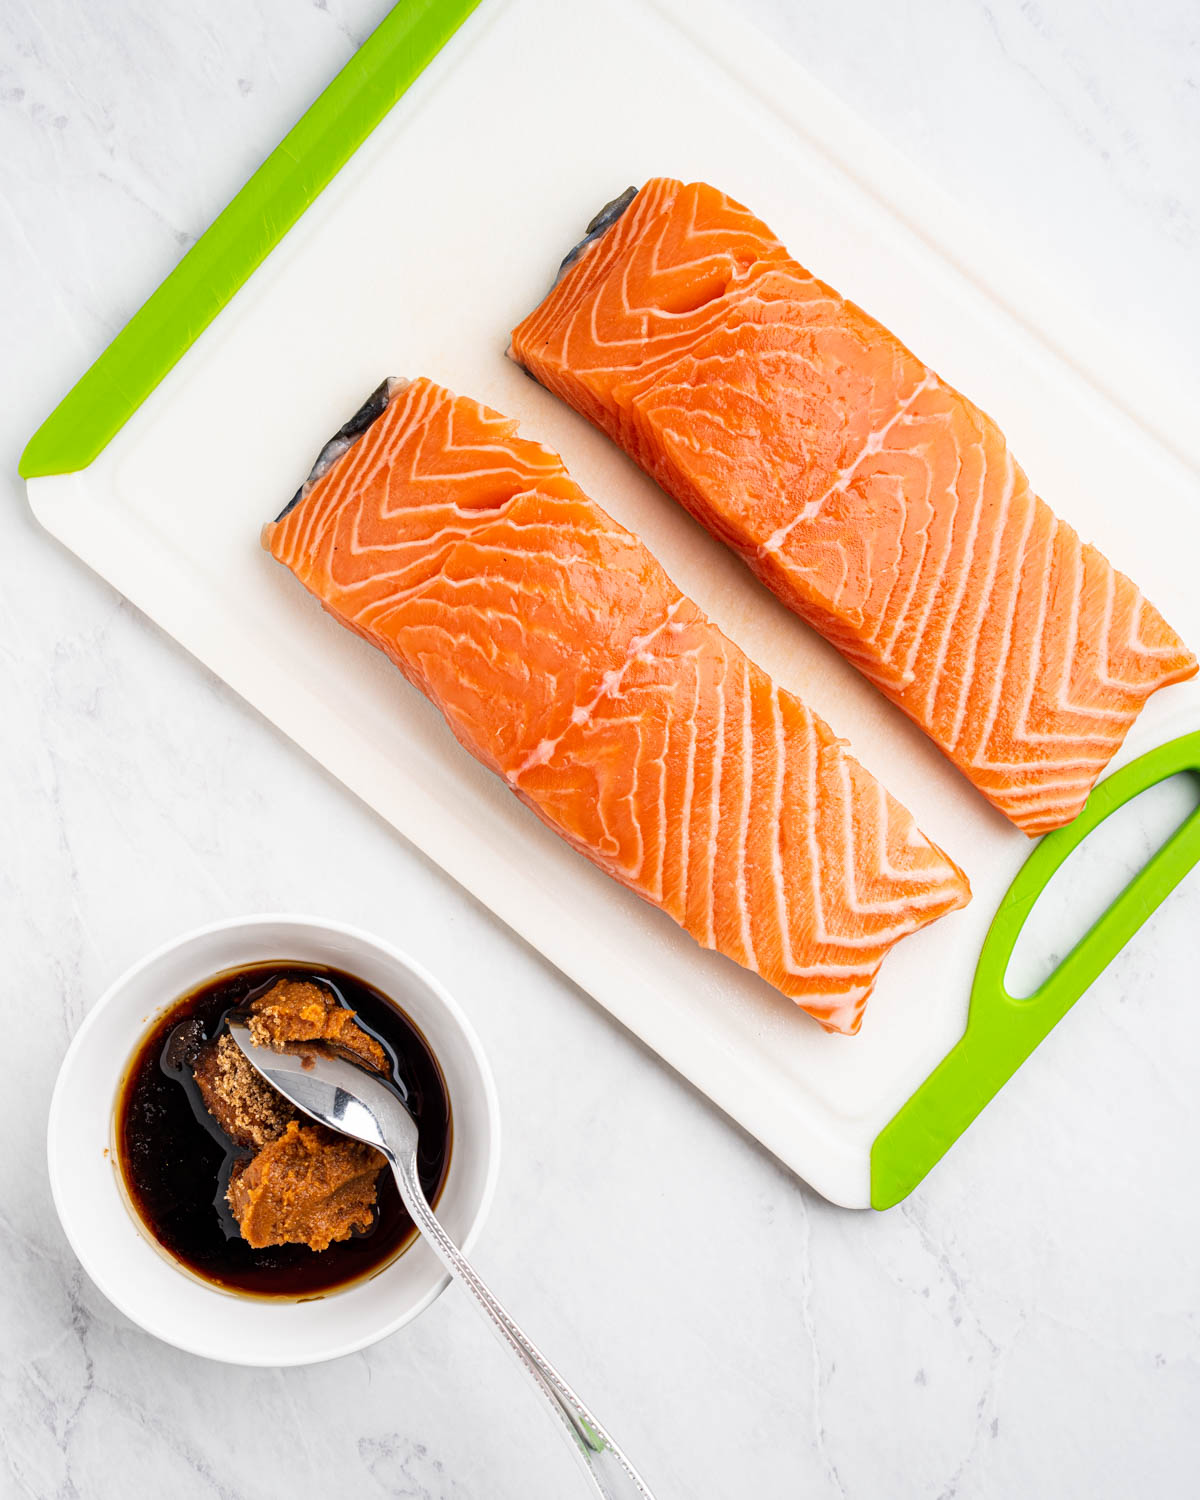 Two slices of salmon with miso glaze ingredients in a bowl.